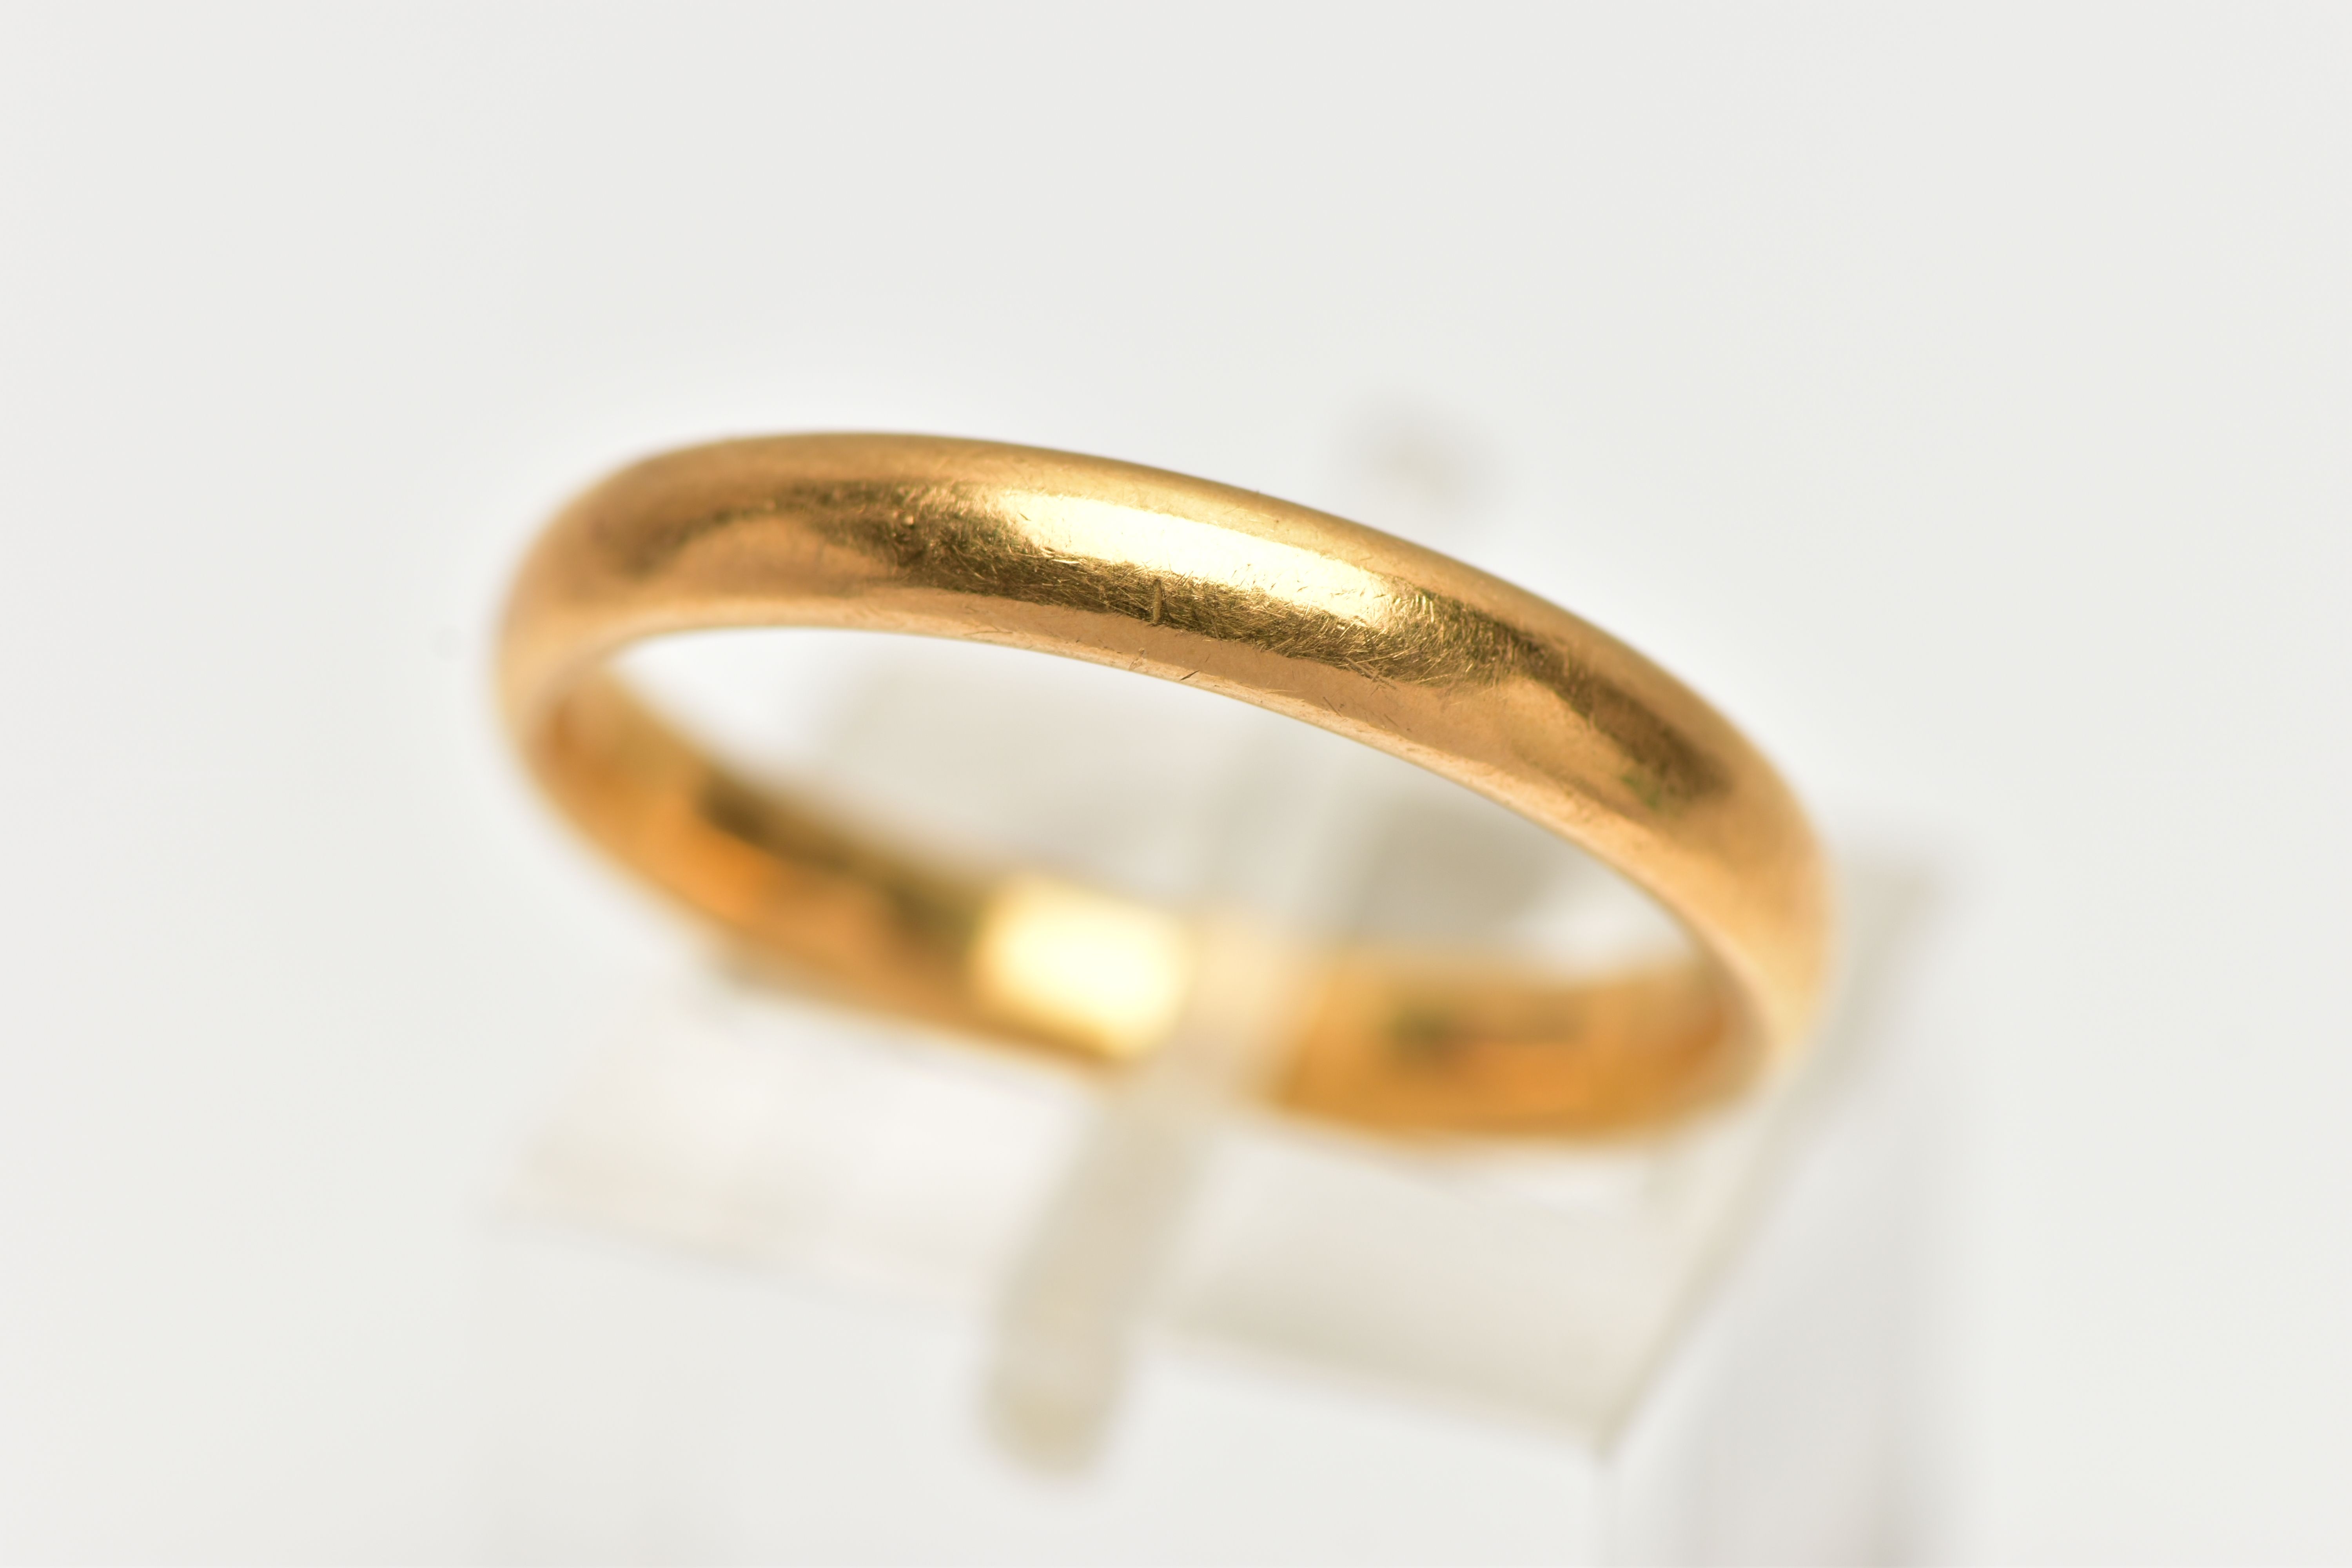 A 22CT YELLOW GOLD BAND RING, polished band, approximate band width 3.2mm, hallmarked 22ct London